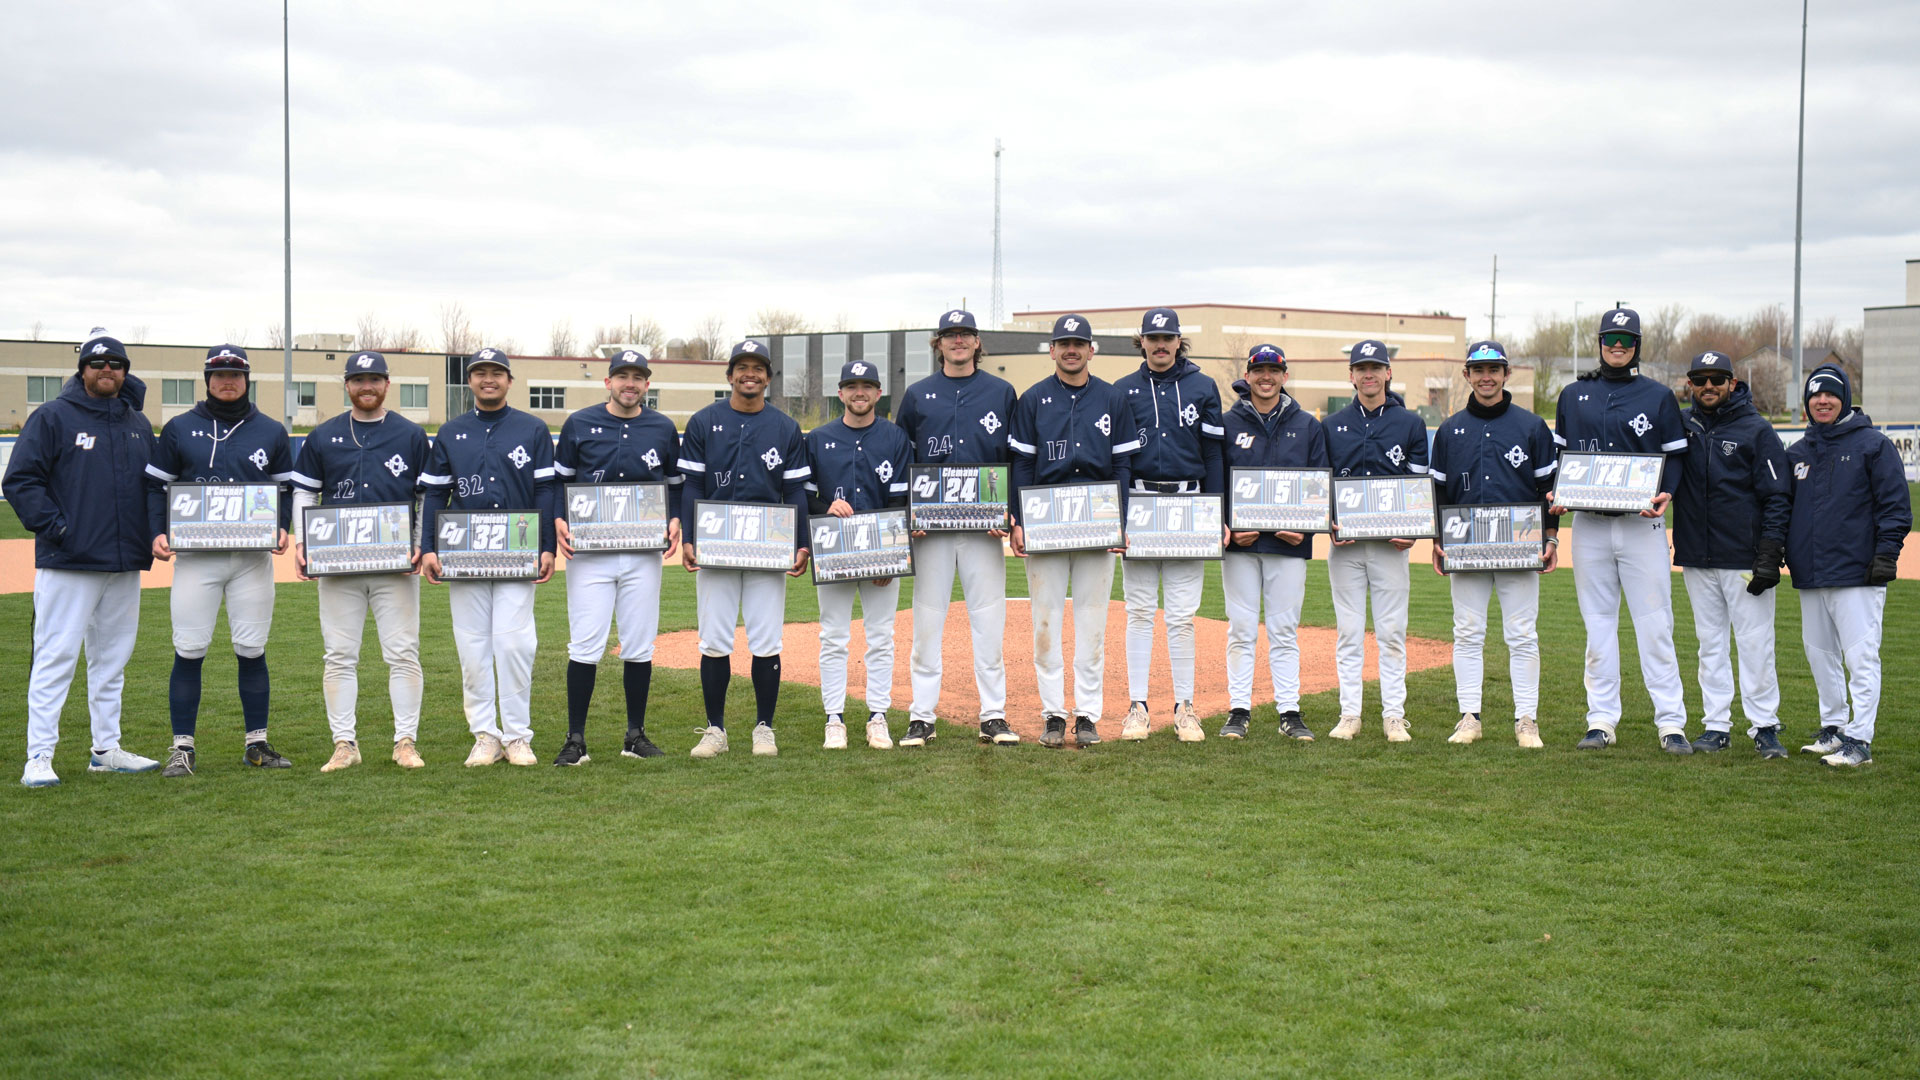 Pride salvage a game on Senior Day matchup against No. 17 MidAmerica Nazarene